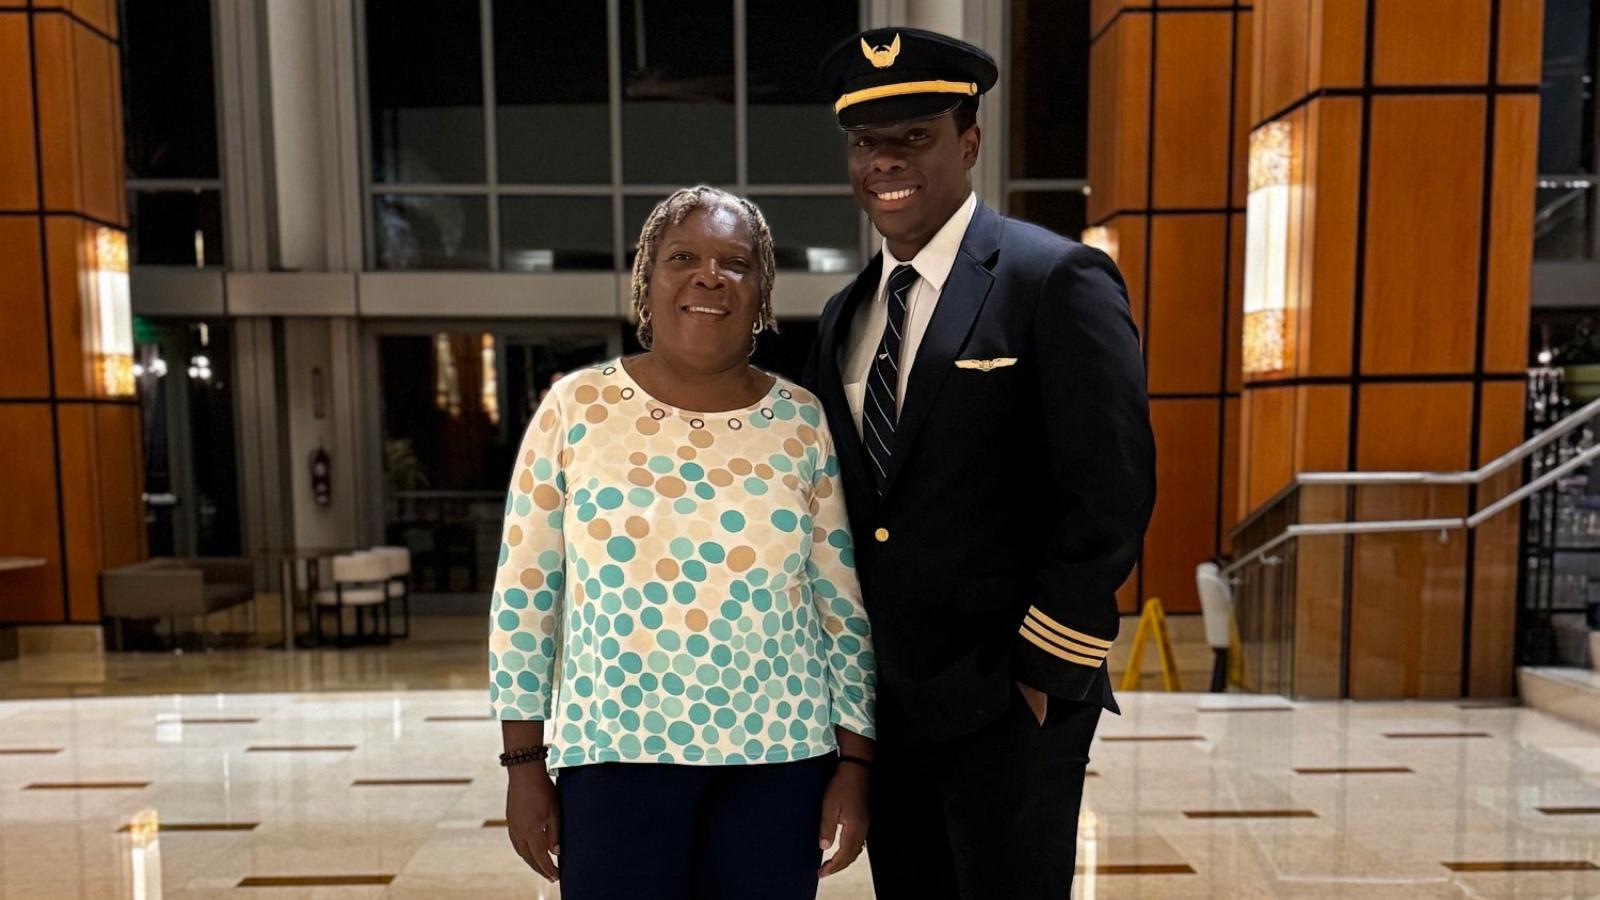 PHOTO: Jerome Lawrence, a pilot for United Airlines, surprised his mom Gwendoline Lawrence on a flight to Port of Spain, the capital of Trinidad and Tobago, where the family is from.